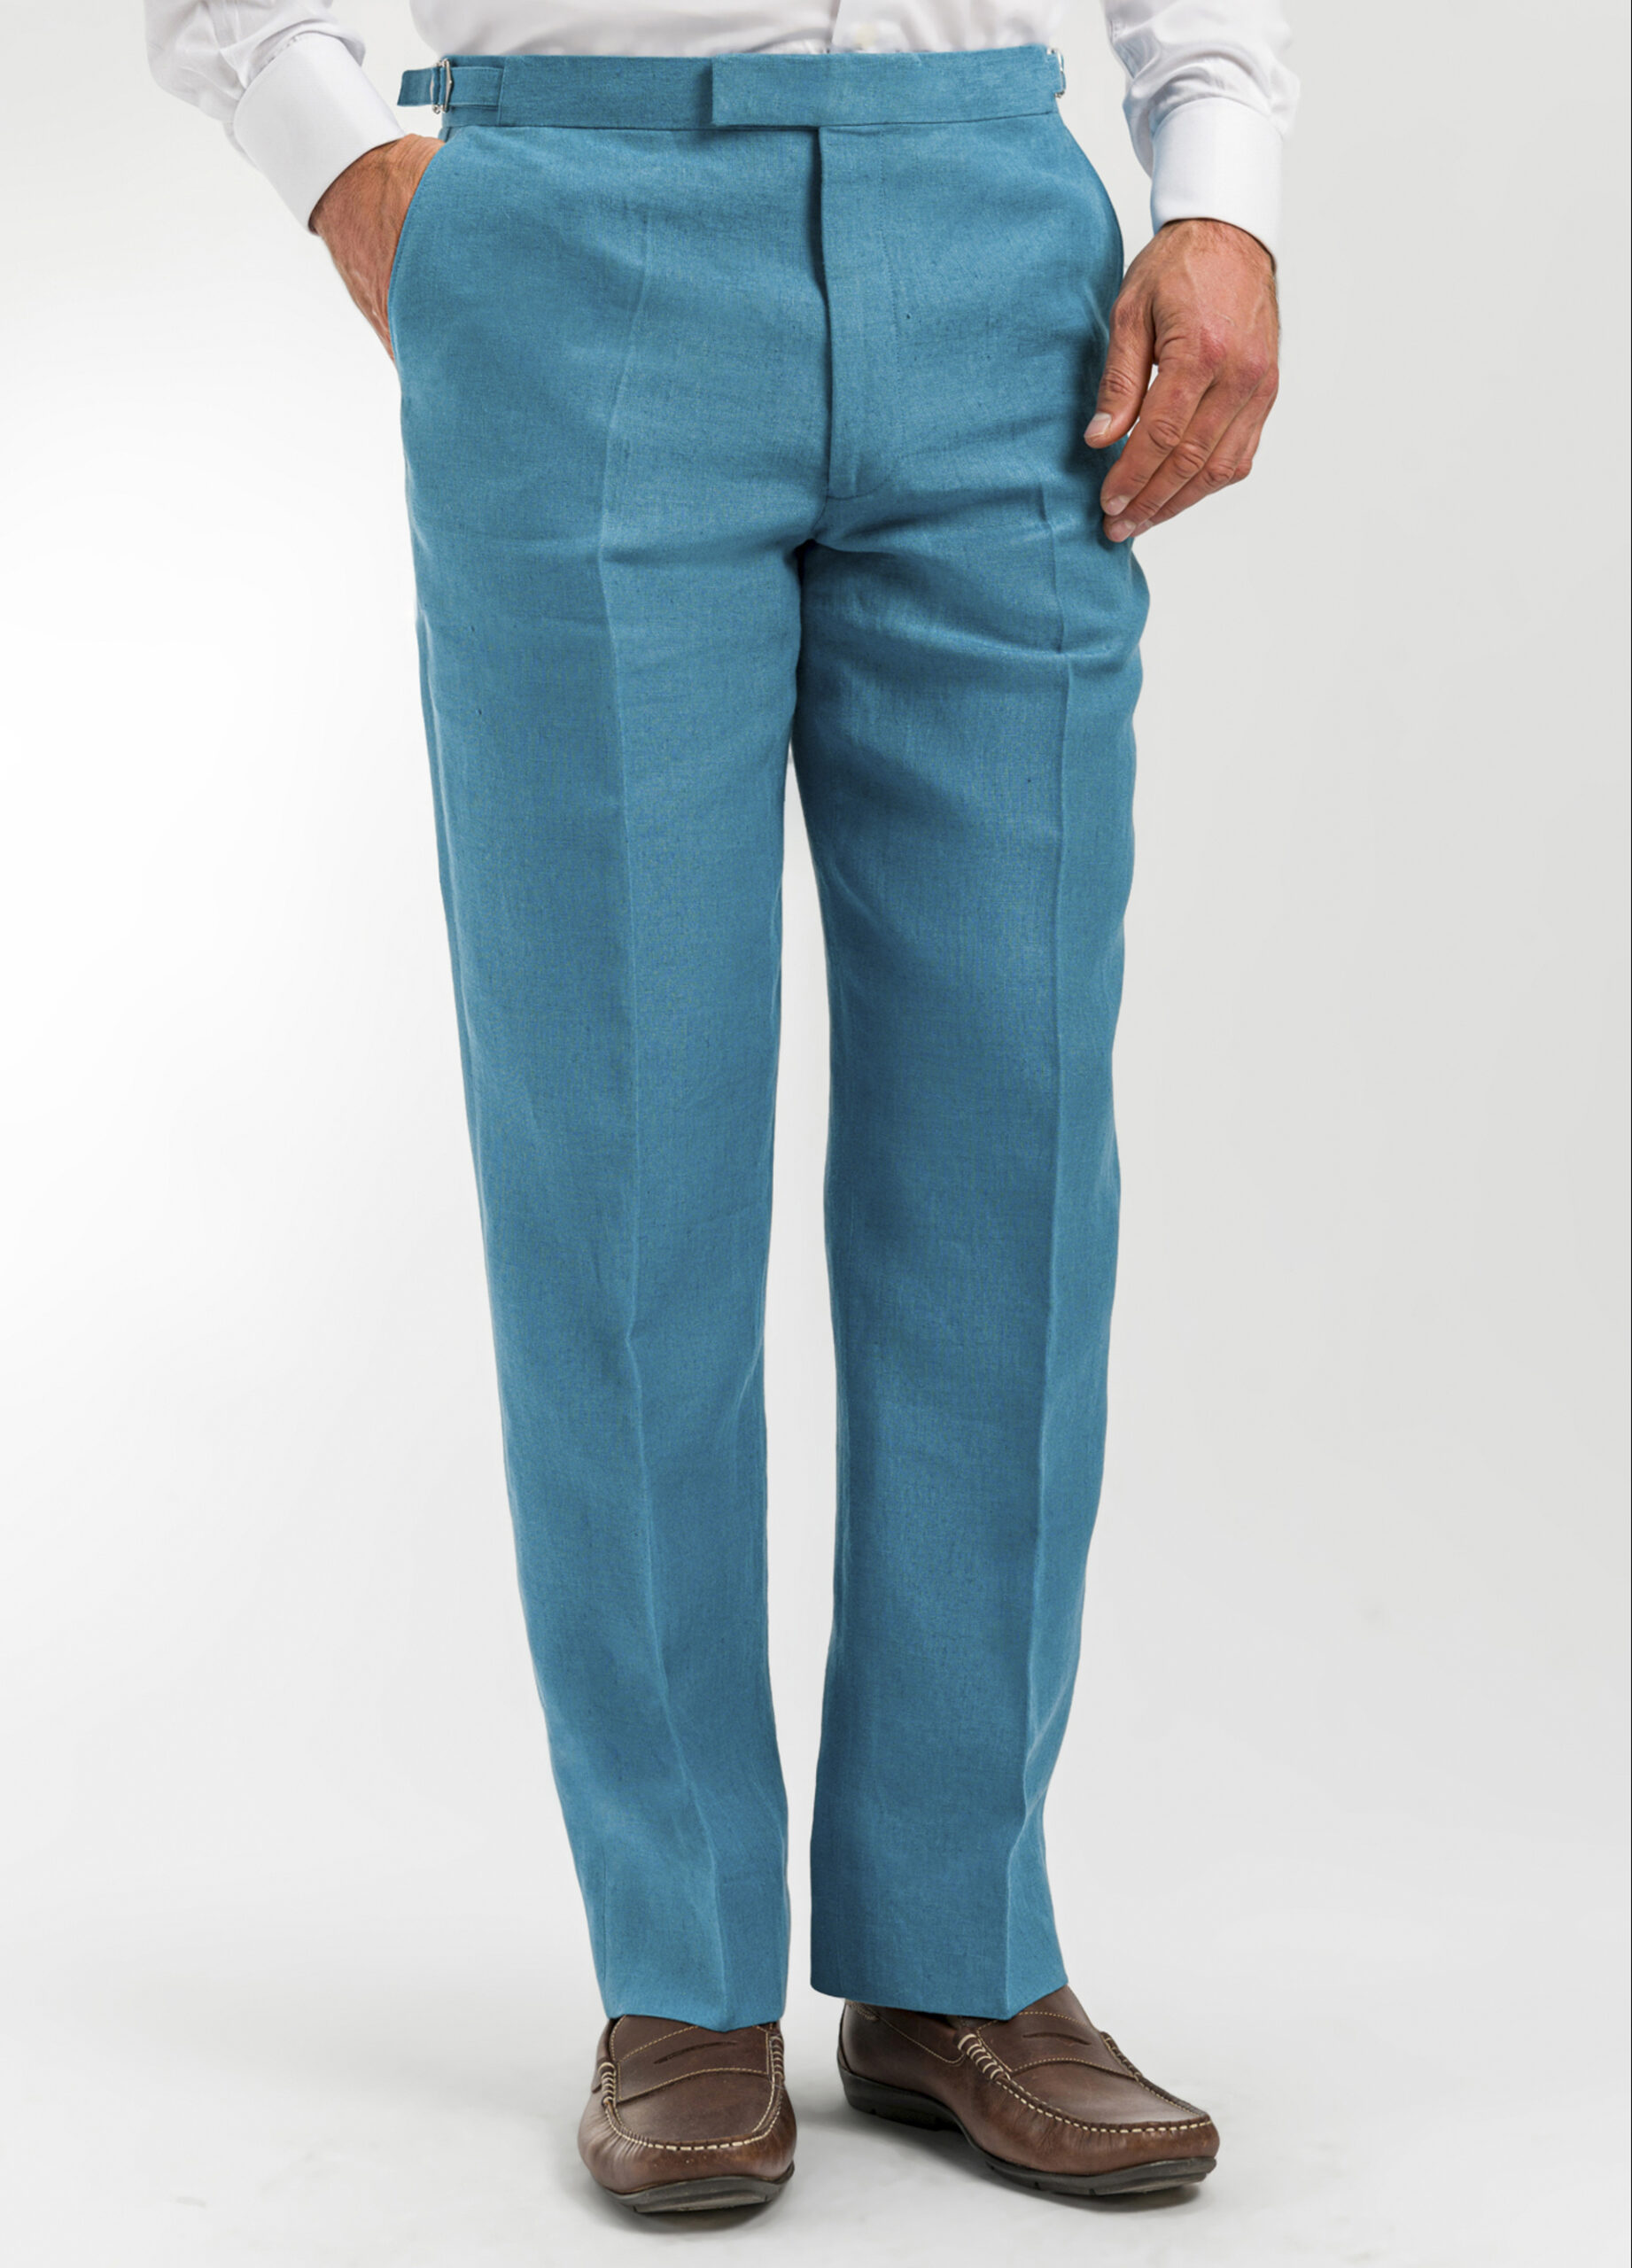 mens-teal-linen-trousers